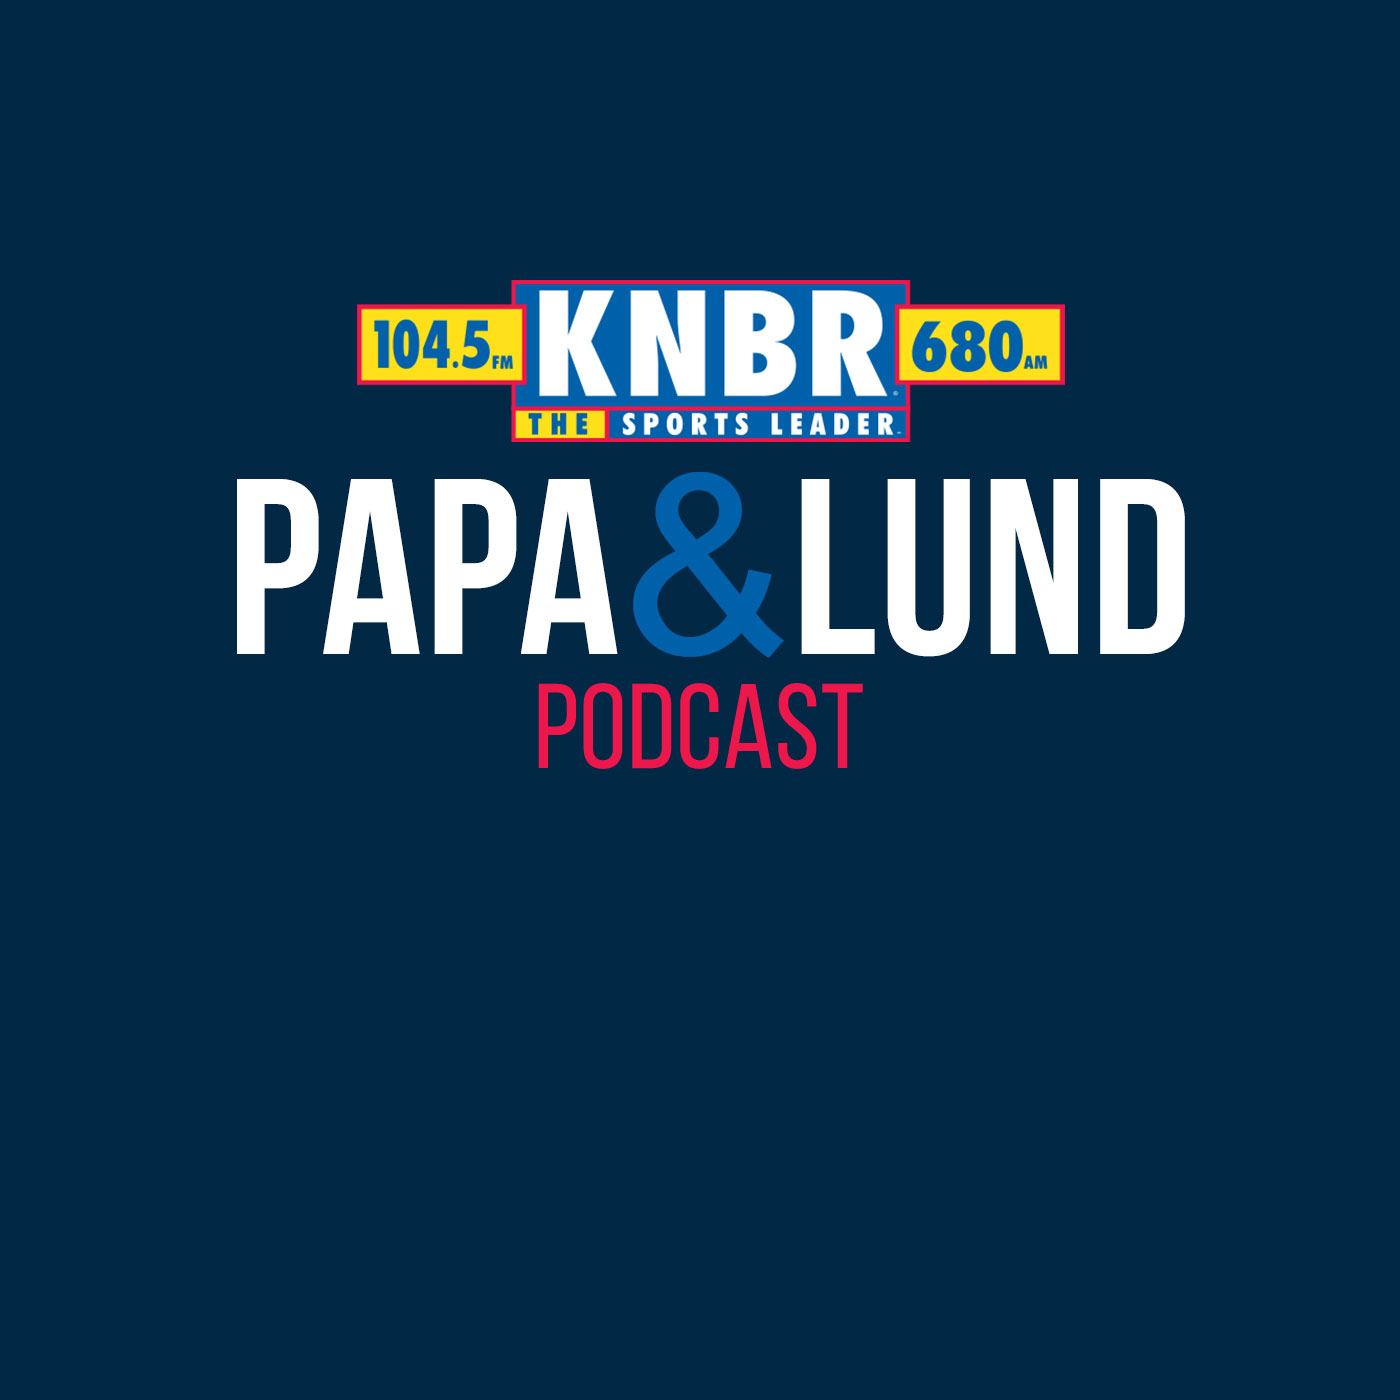 11-21 Matt Maiocco joins Papa & Lund to discuss the big NFC West showdown in Seattle on Thanksgiving and how the 49ers cope with the loss of Talanoa Hufanga in the secondary